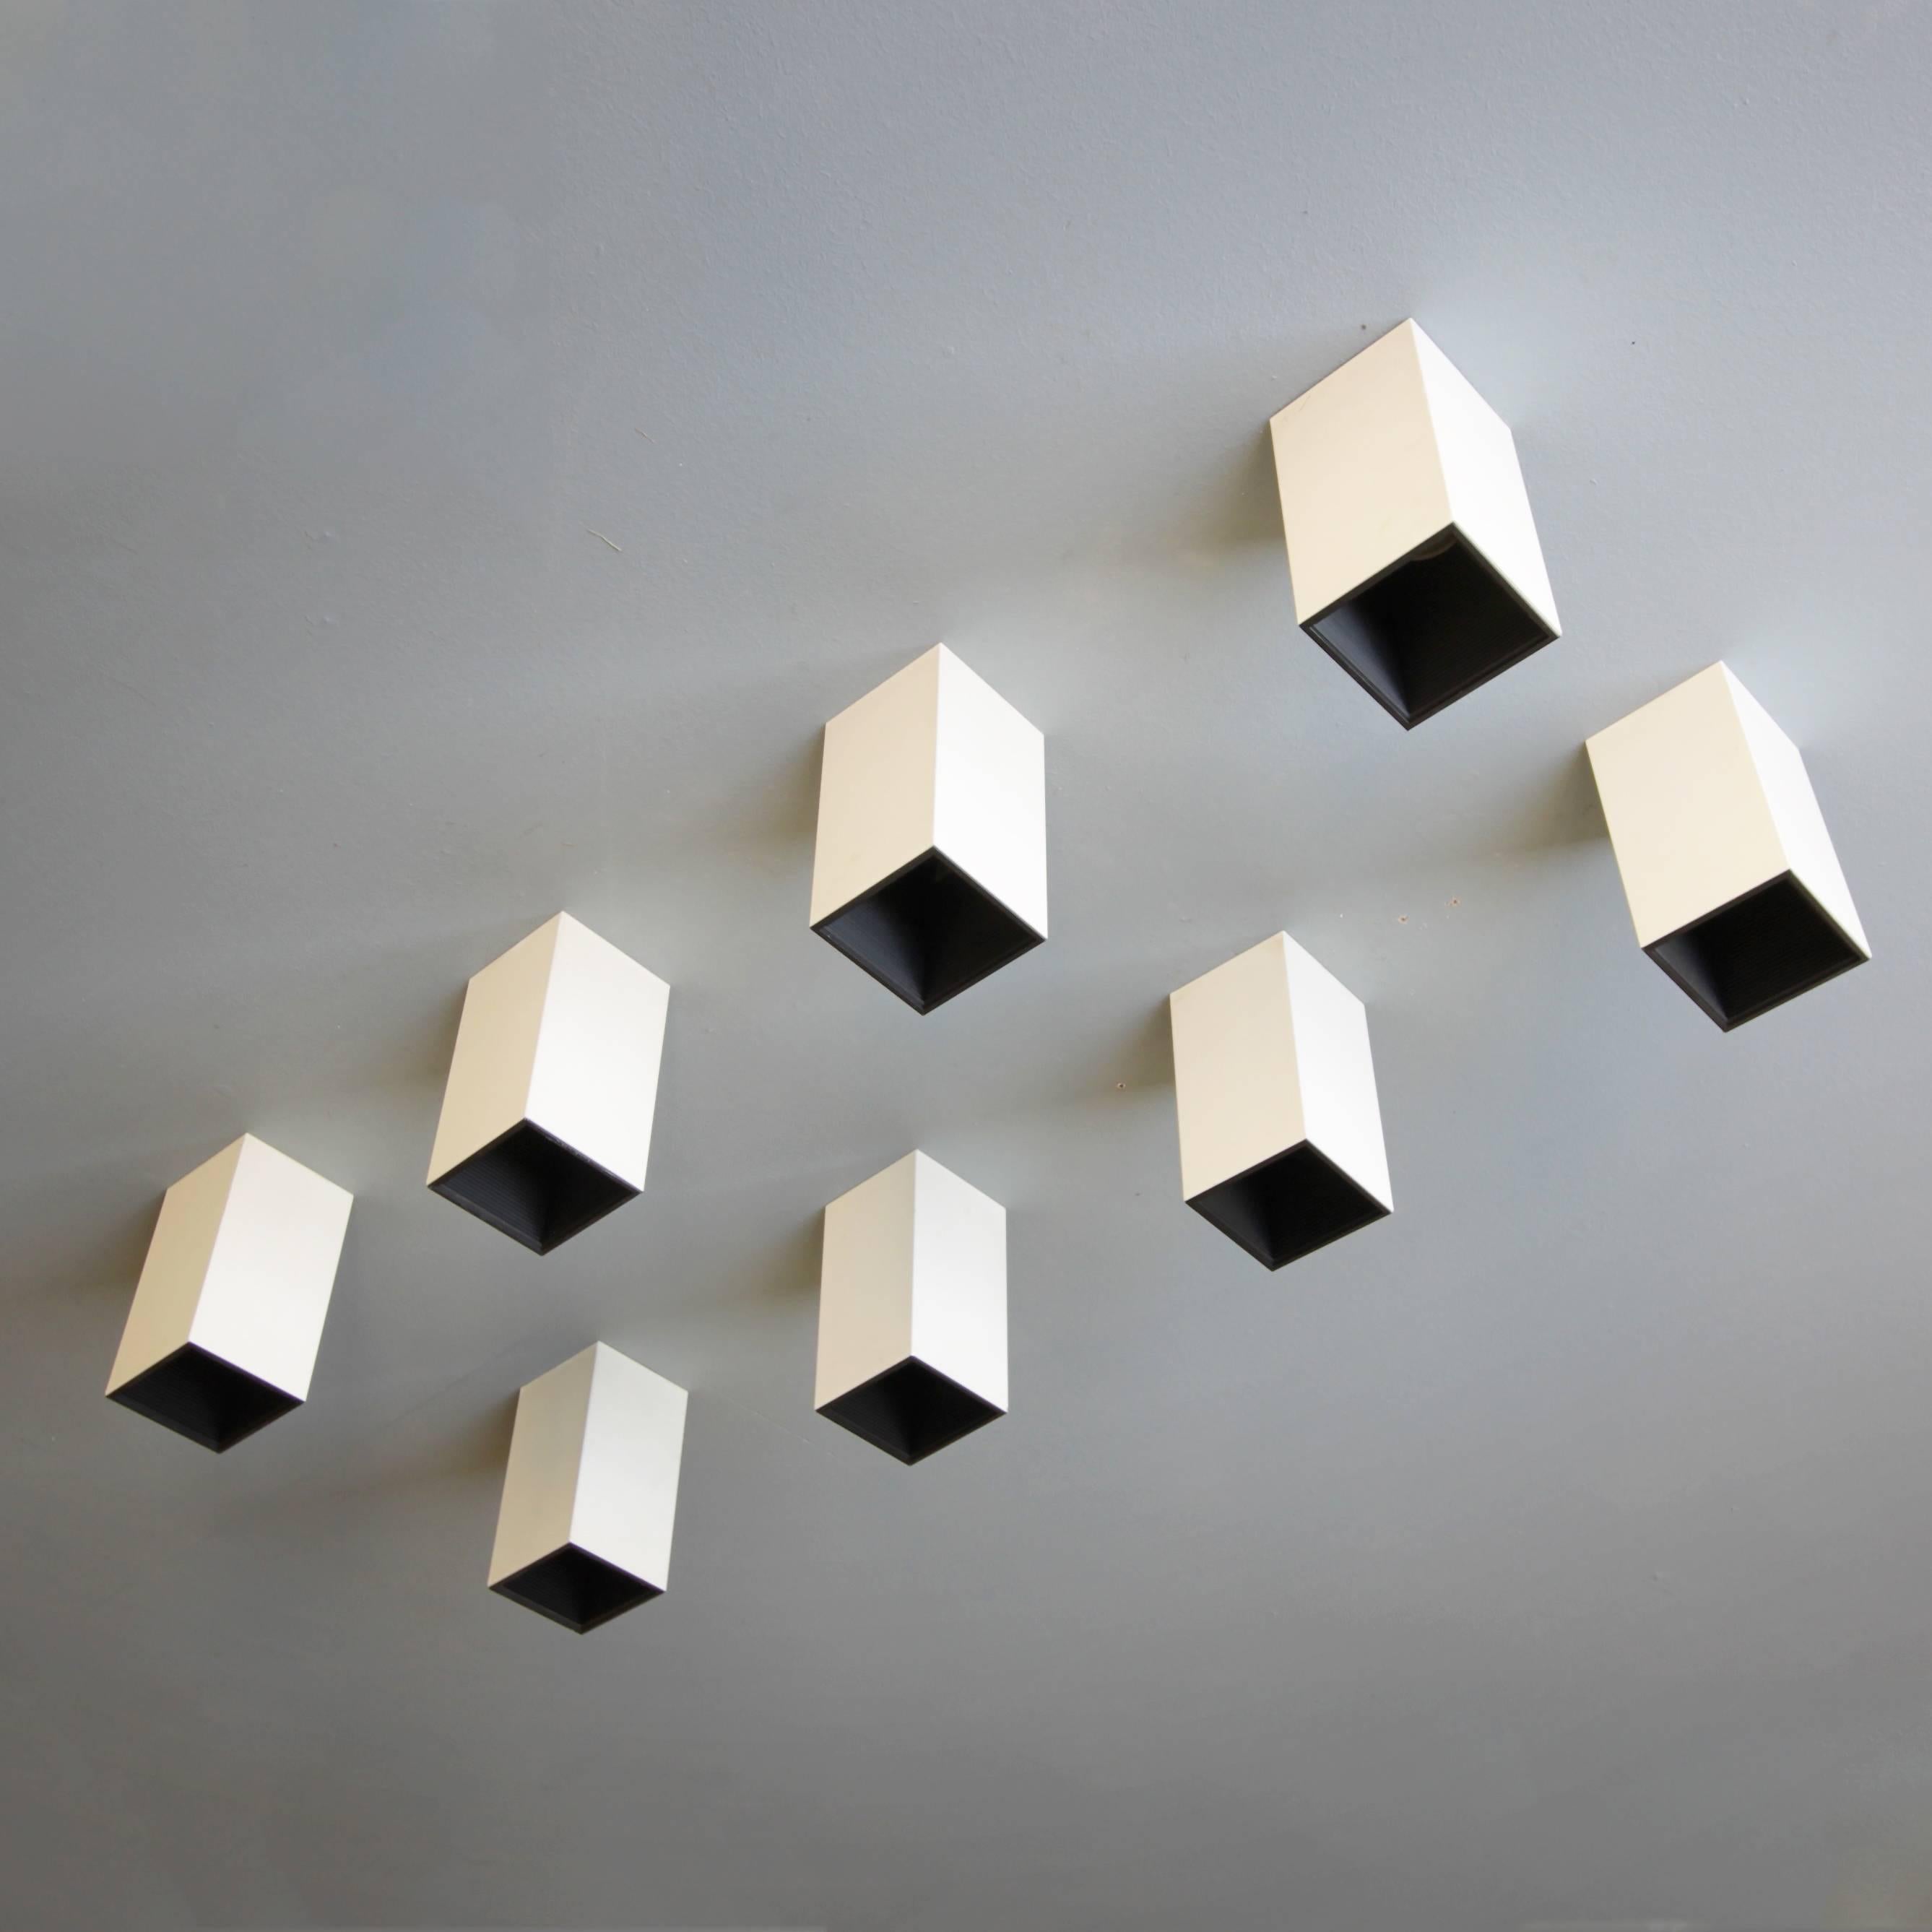 Eight spot lights for Hiemstra Evolux, Holland. Measurements of one-light: Height 6.9 in. (17,5 cm), width 3.5 in. (9 cm), depth 3.5 in. (9 cm).
Price is for all eight pieces.